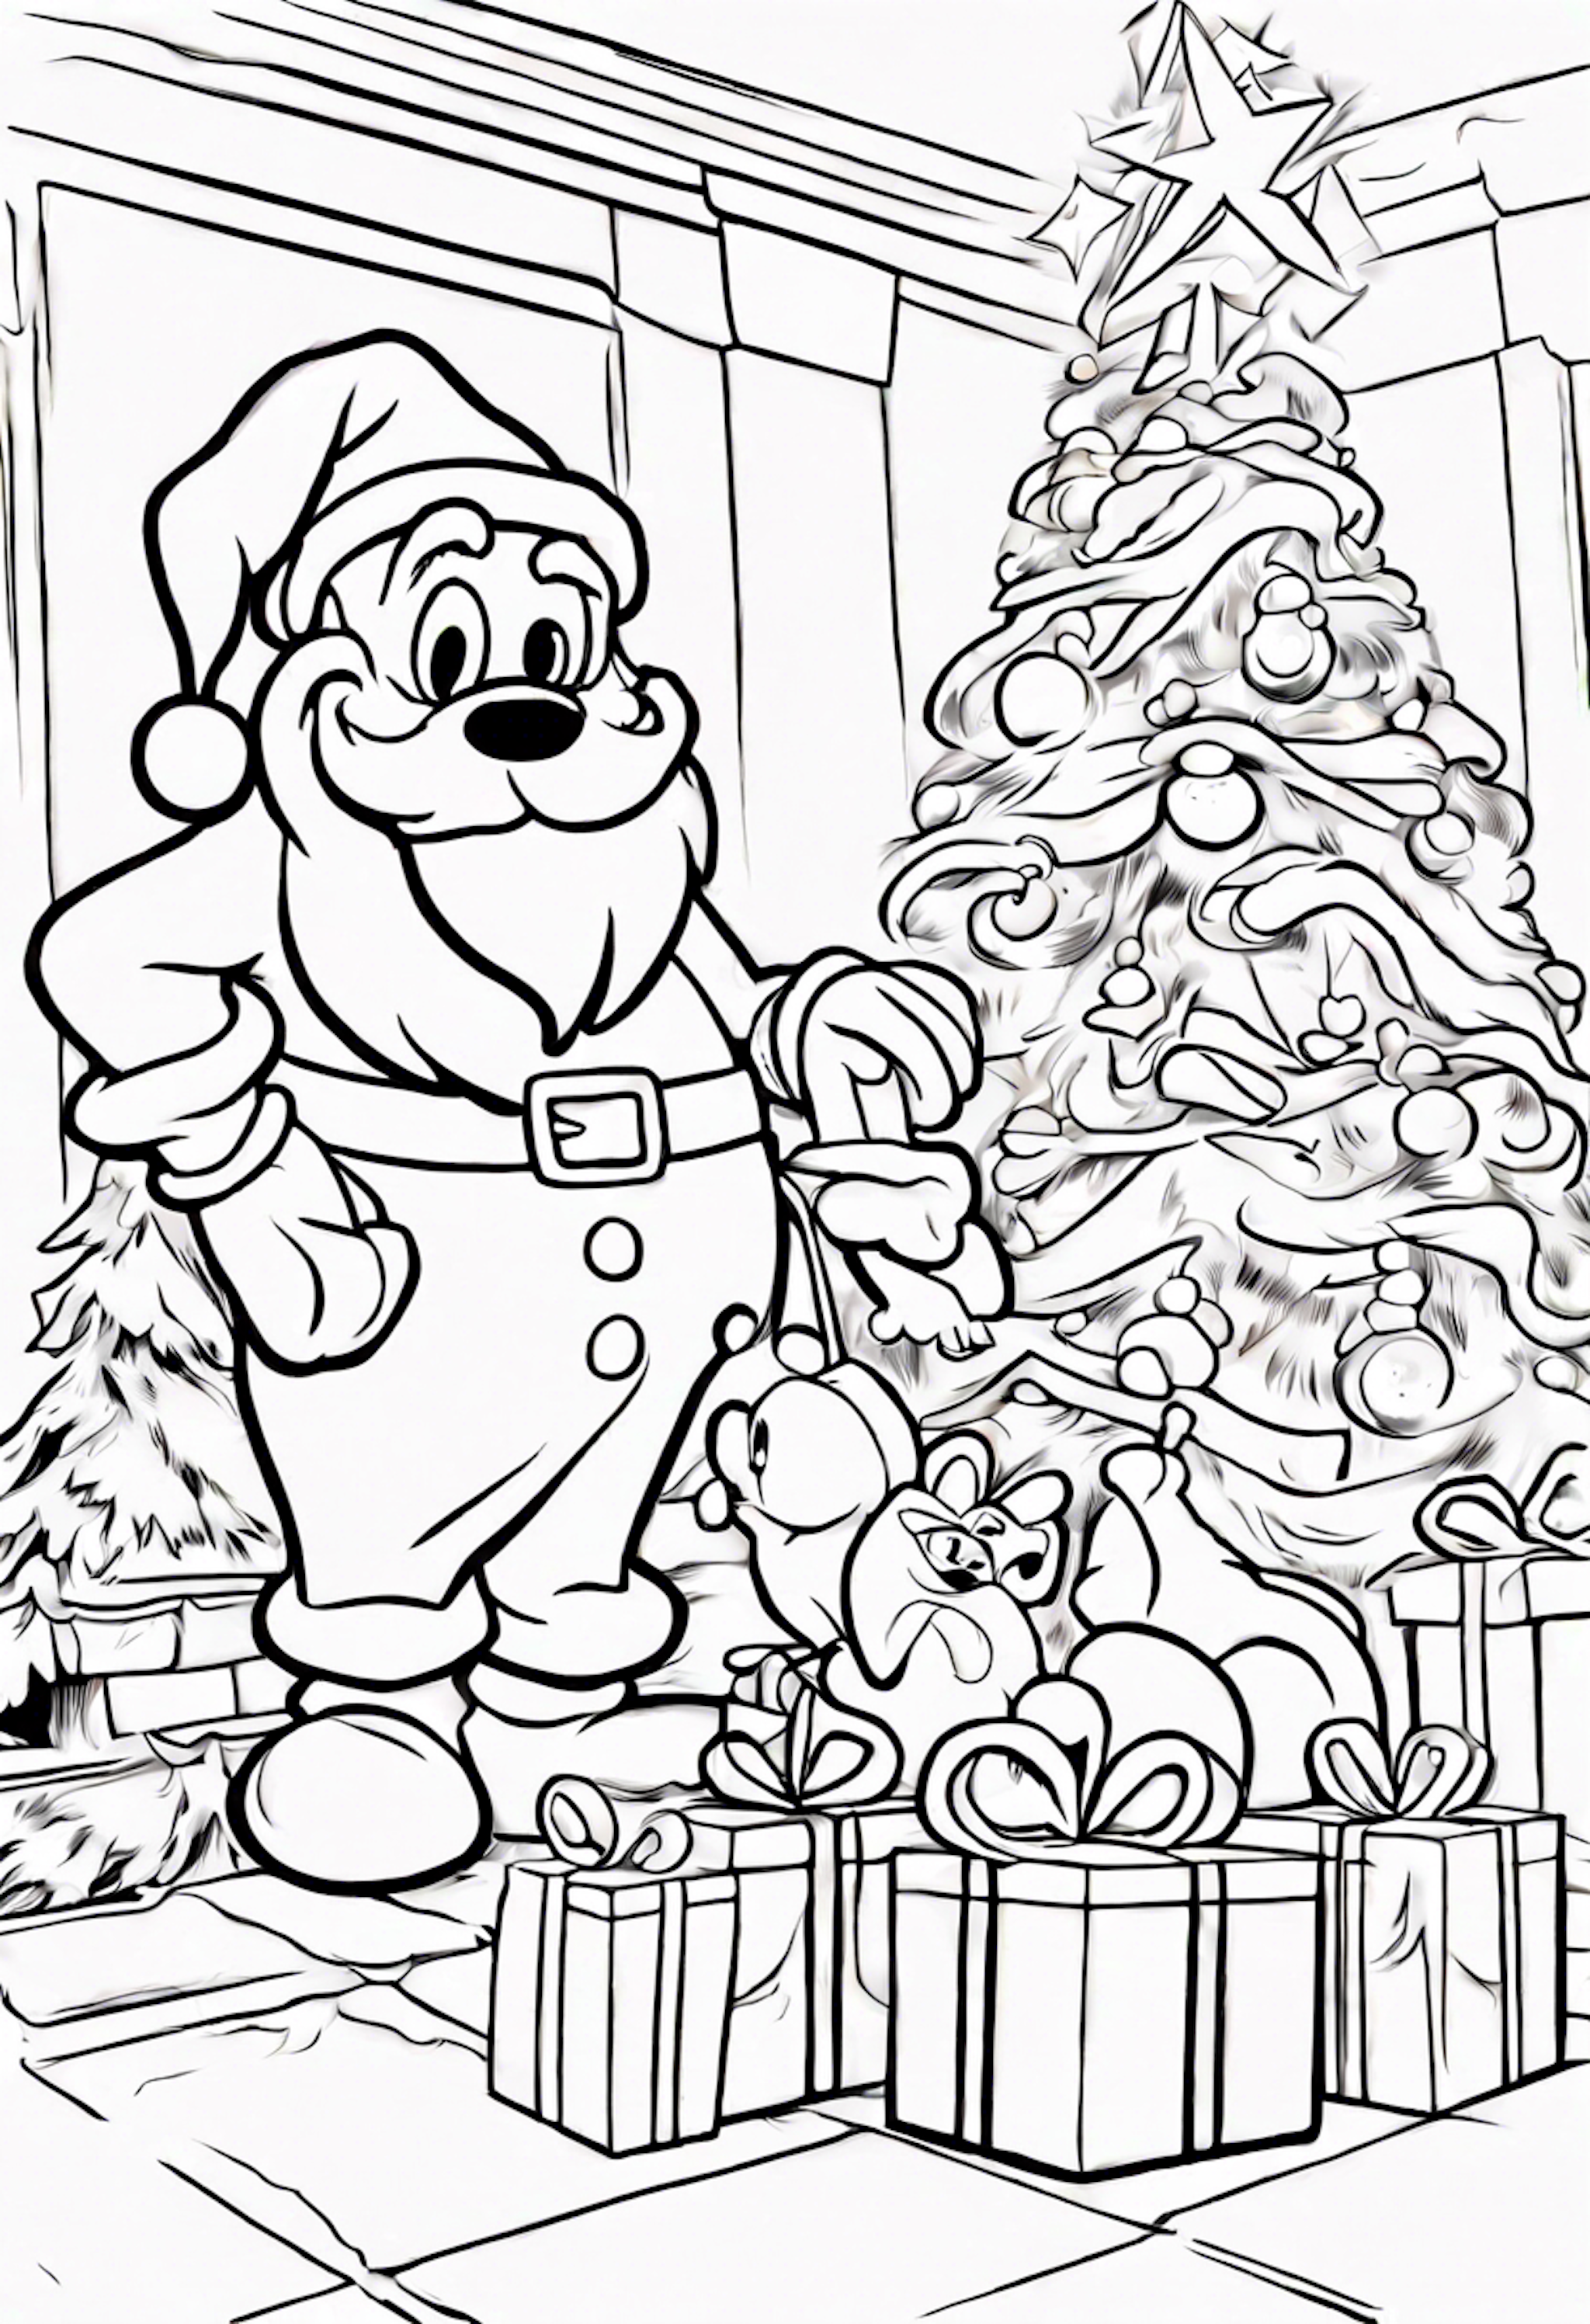 A coloring page for 1 Disney Christmas coloring pages